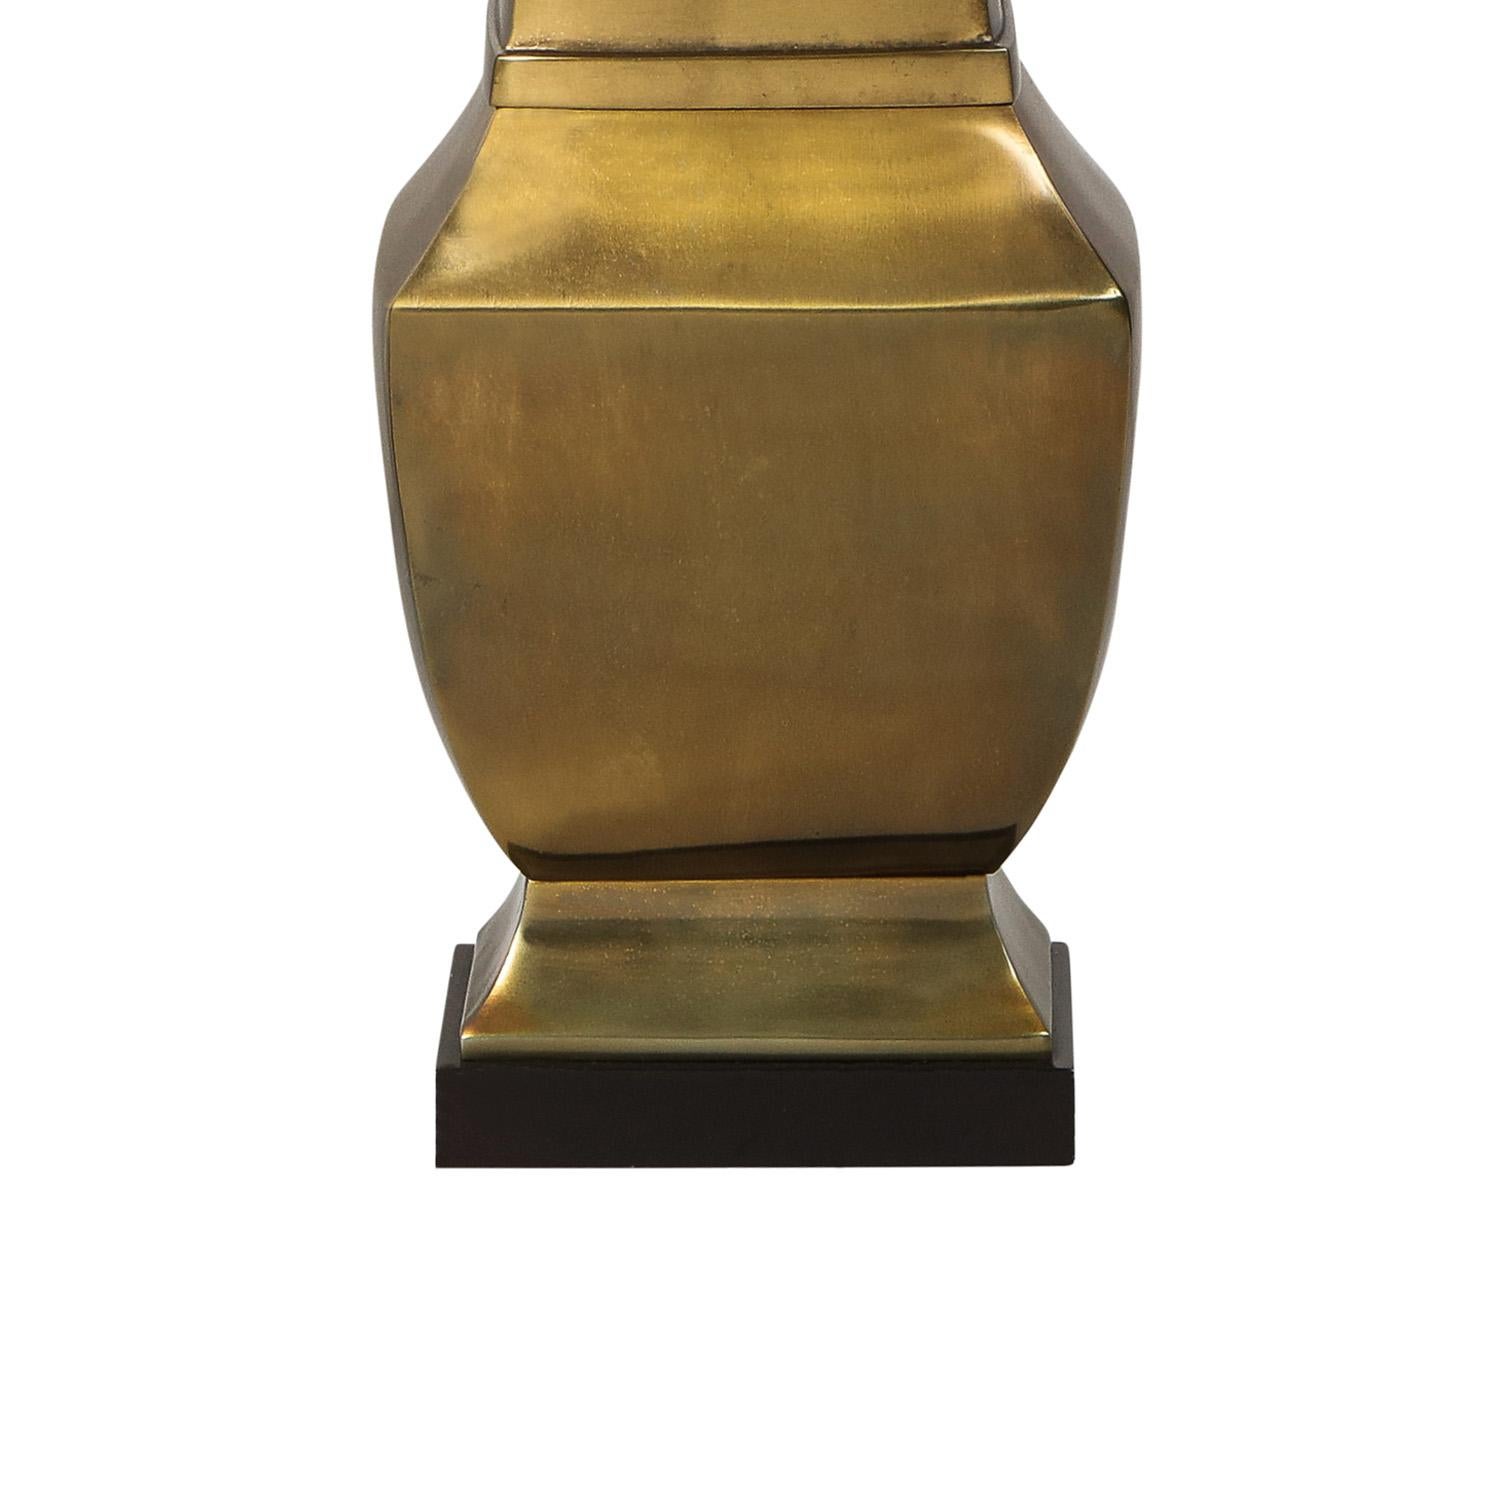 Paul Hanson Neoclassical Table Lamps in Bronze, 1950s In Excellent Condition For Sale In New York, NY